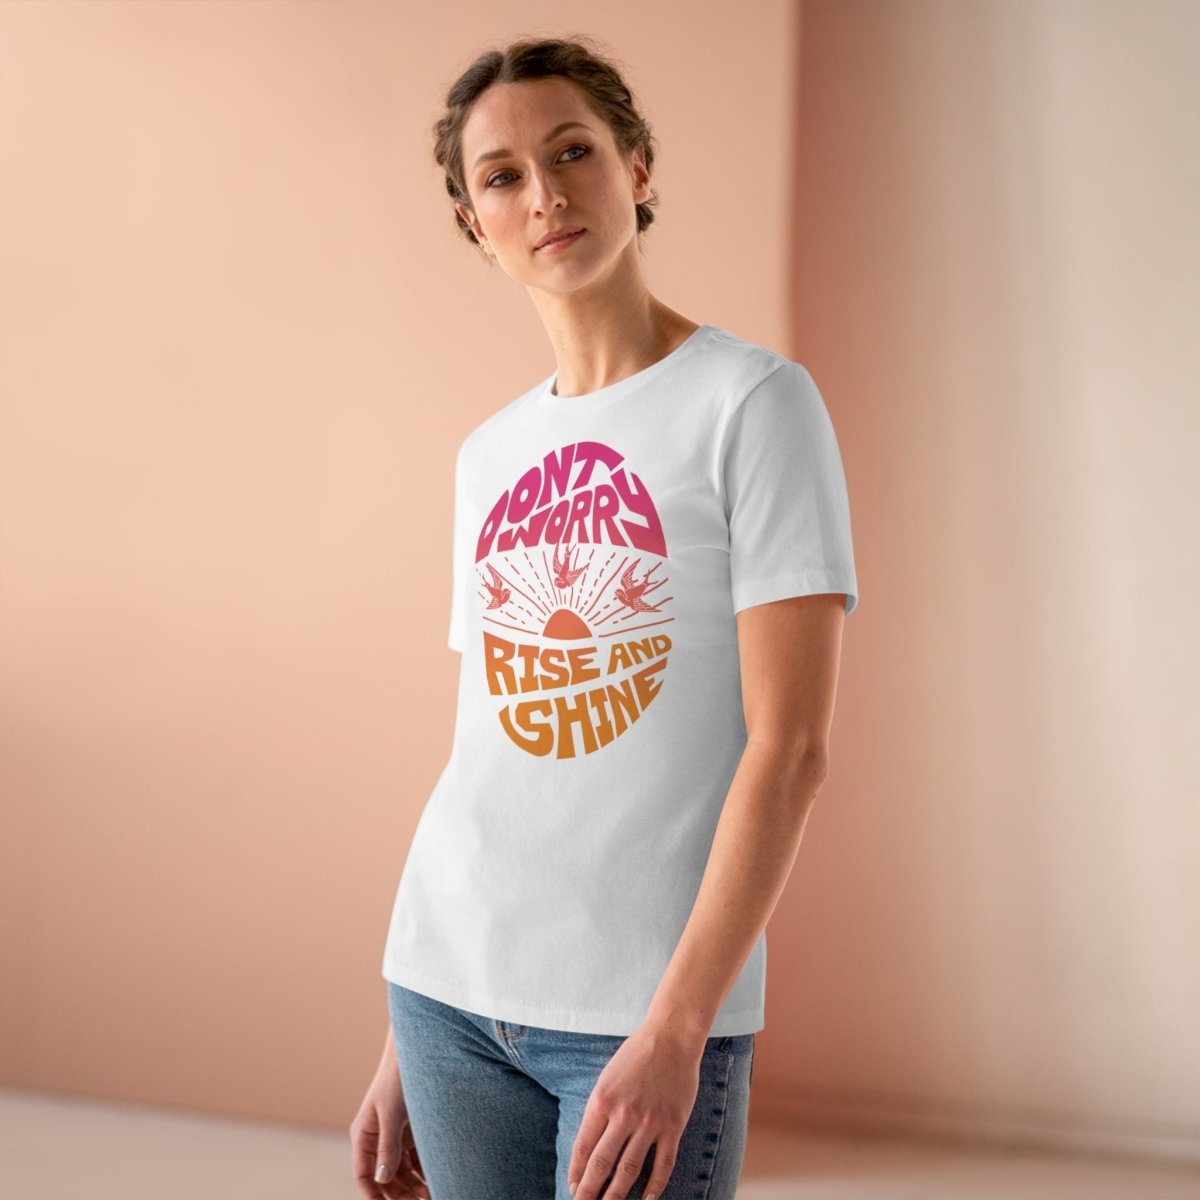 Don't Worry Women's Premium Relaxed Fit T-Shirt, Rise To Challenges and Shine Inspiration